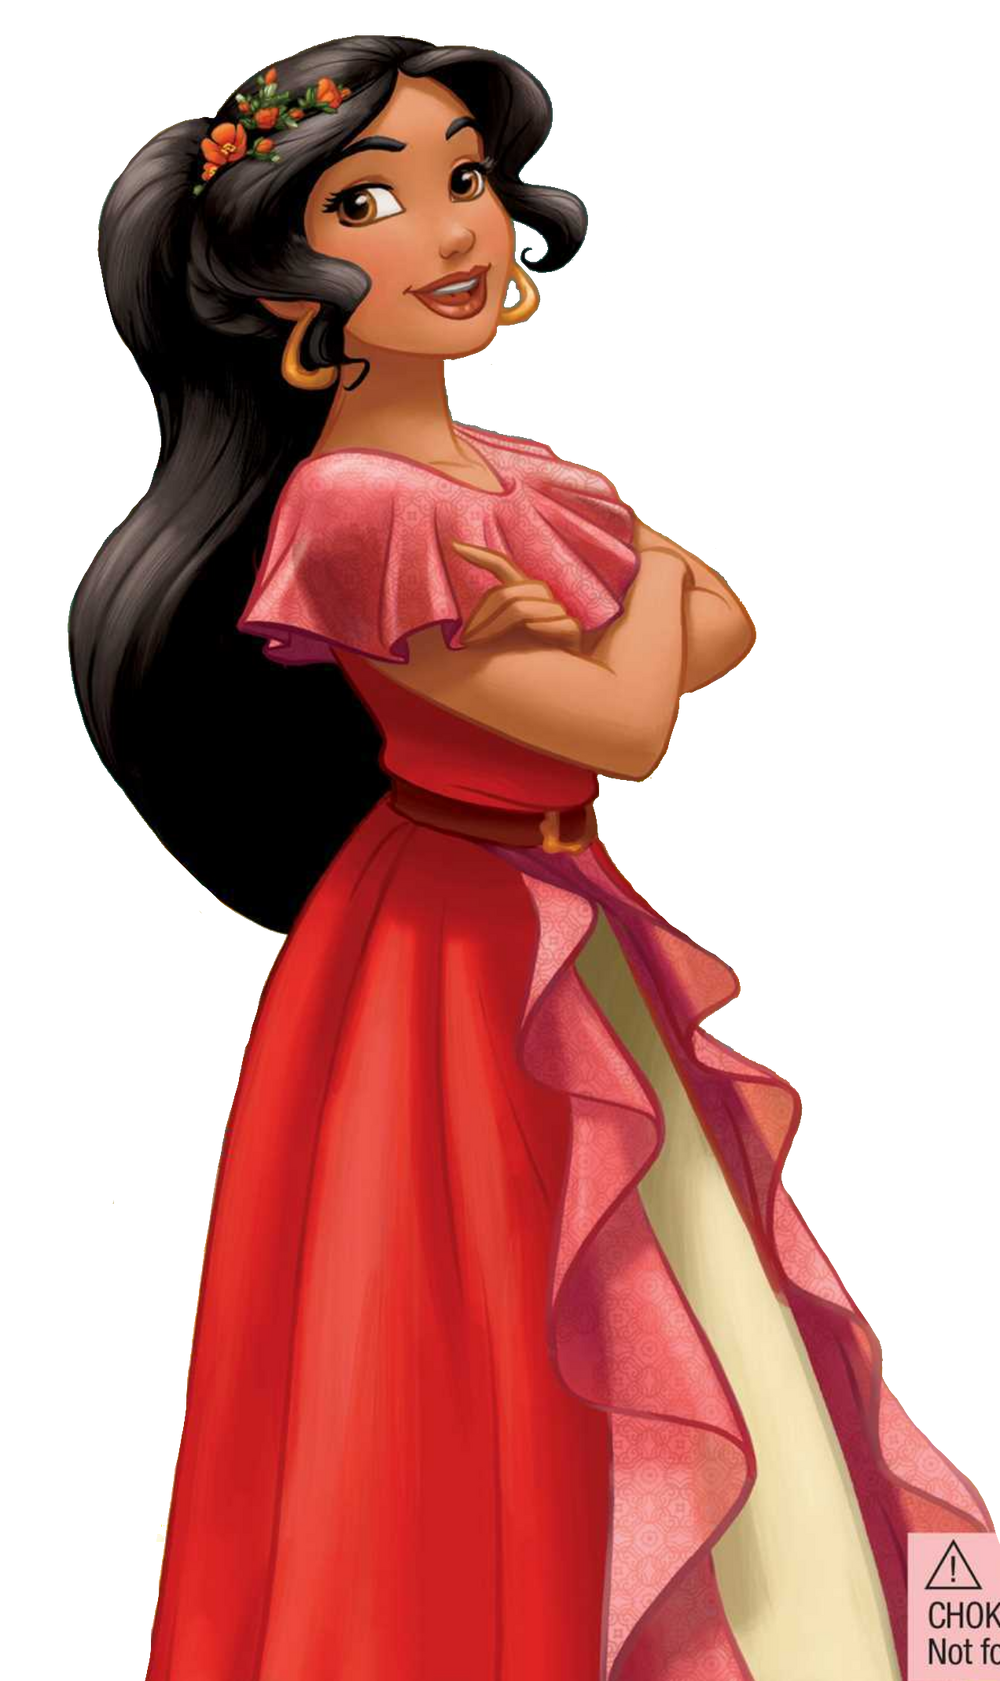 List of Disney Princes  Disney princes, Disney princesses and